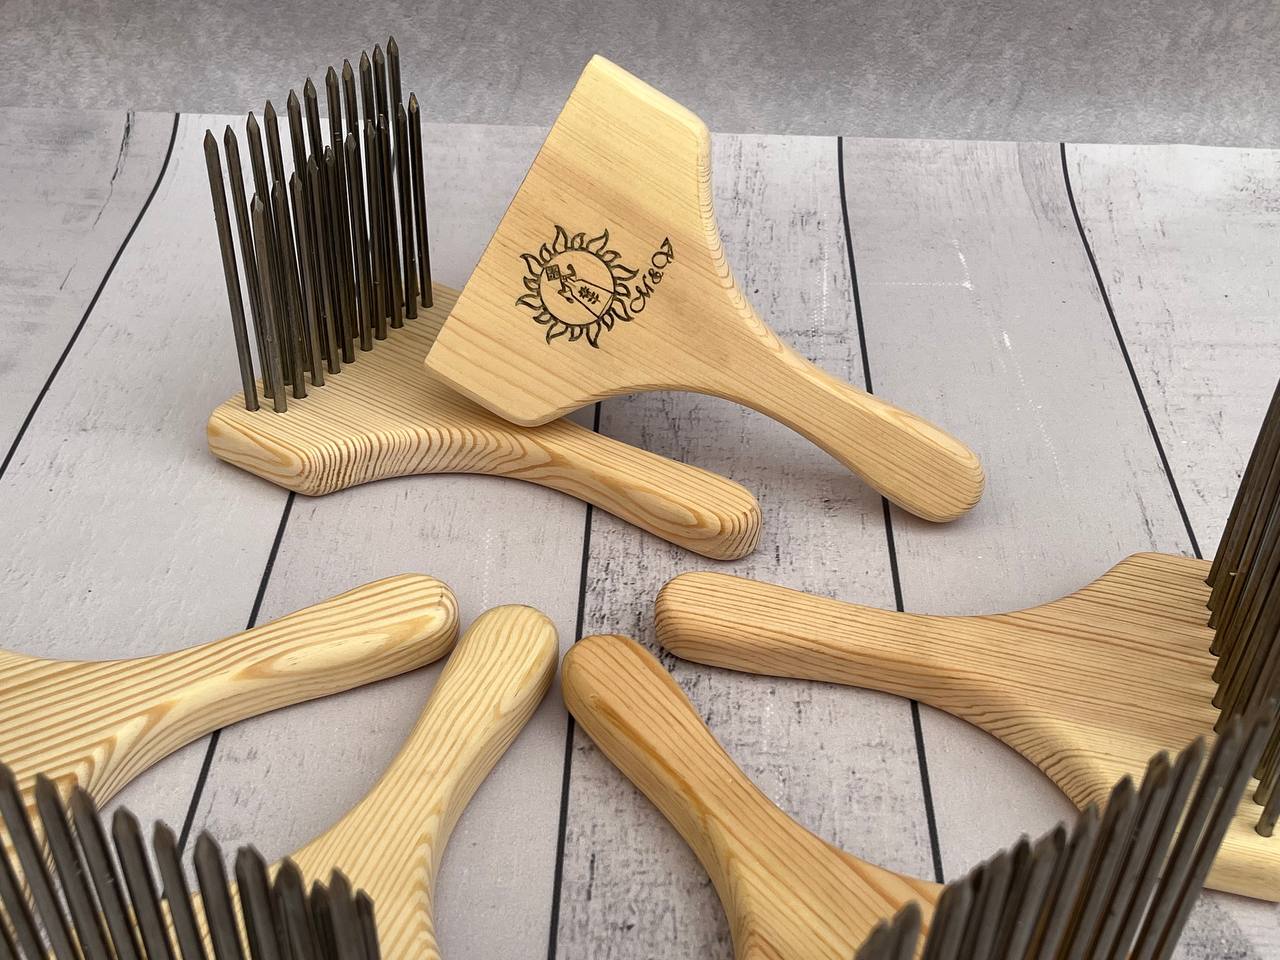 Wool Combs Double, Set of 2 Hand Carders,Wool Combs